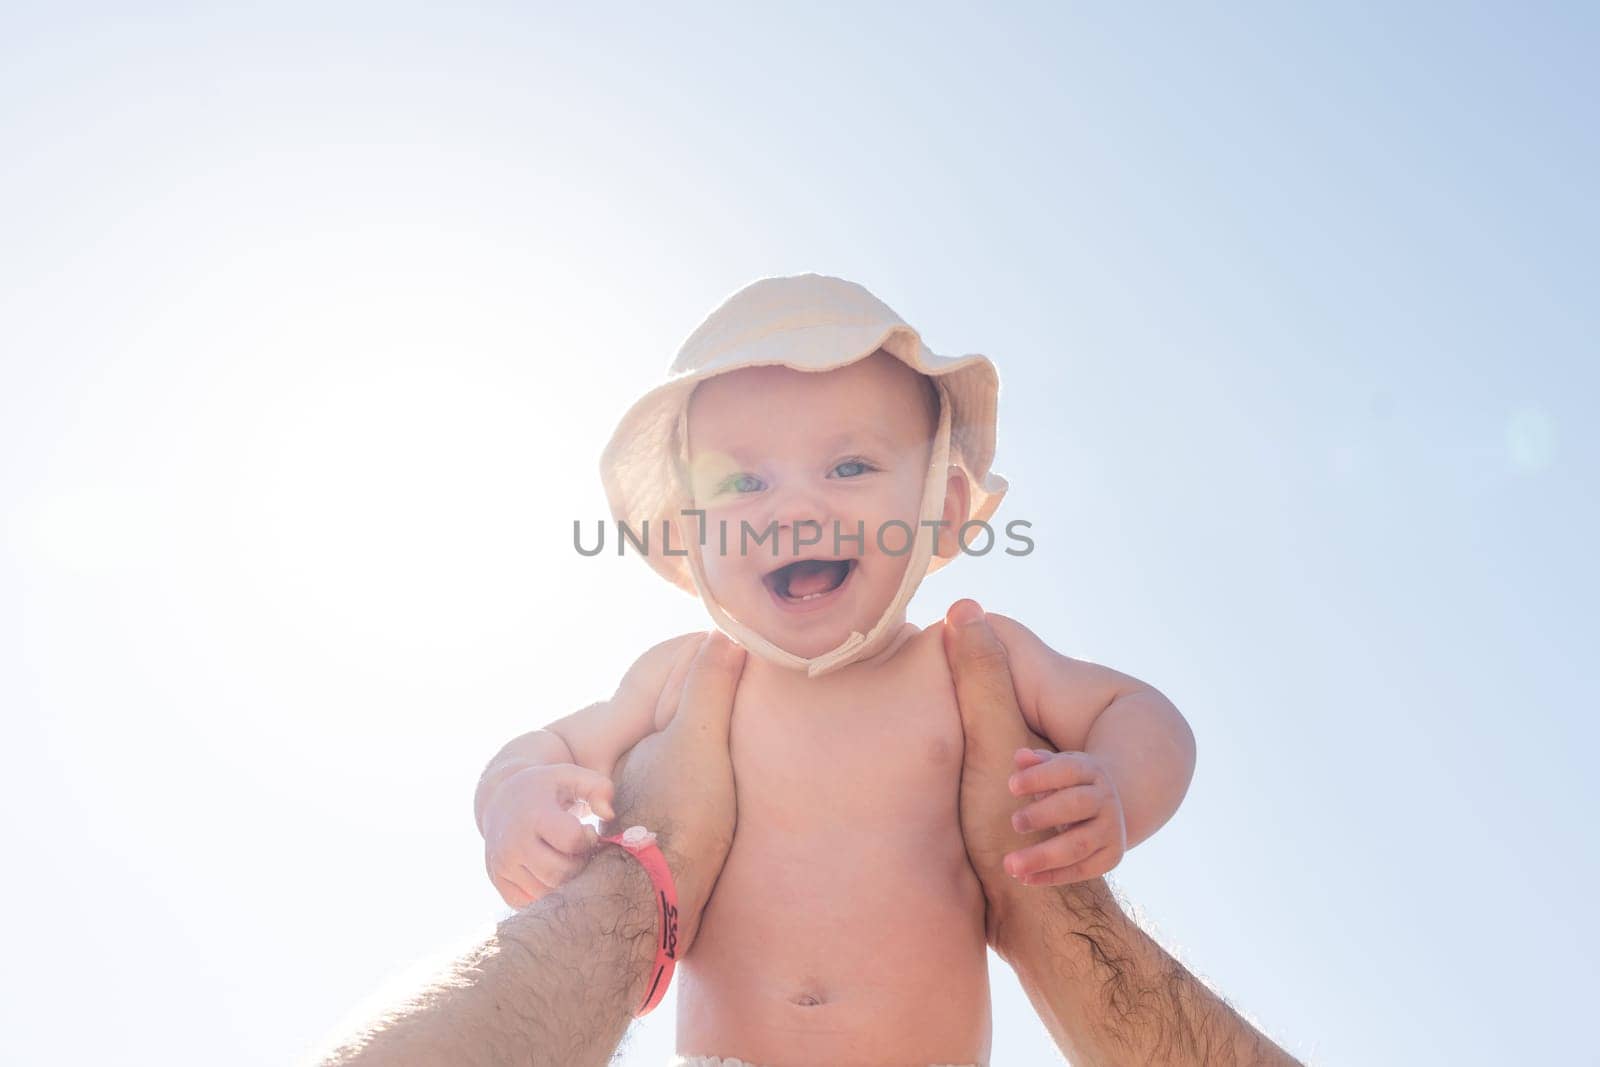 A father's hands securely holding his 6-month-old baby high, the sun's rays adding a magical touch. Concept of safety and nurturing in father-child relationships